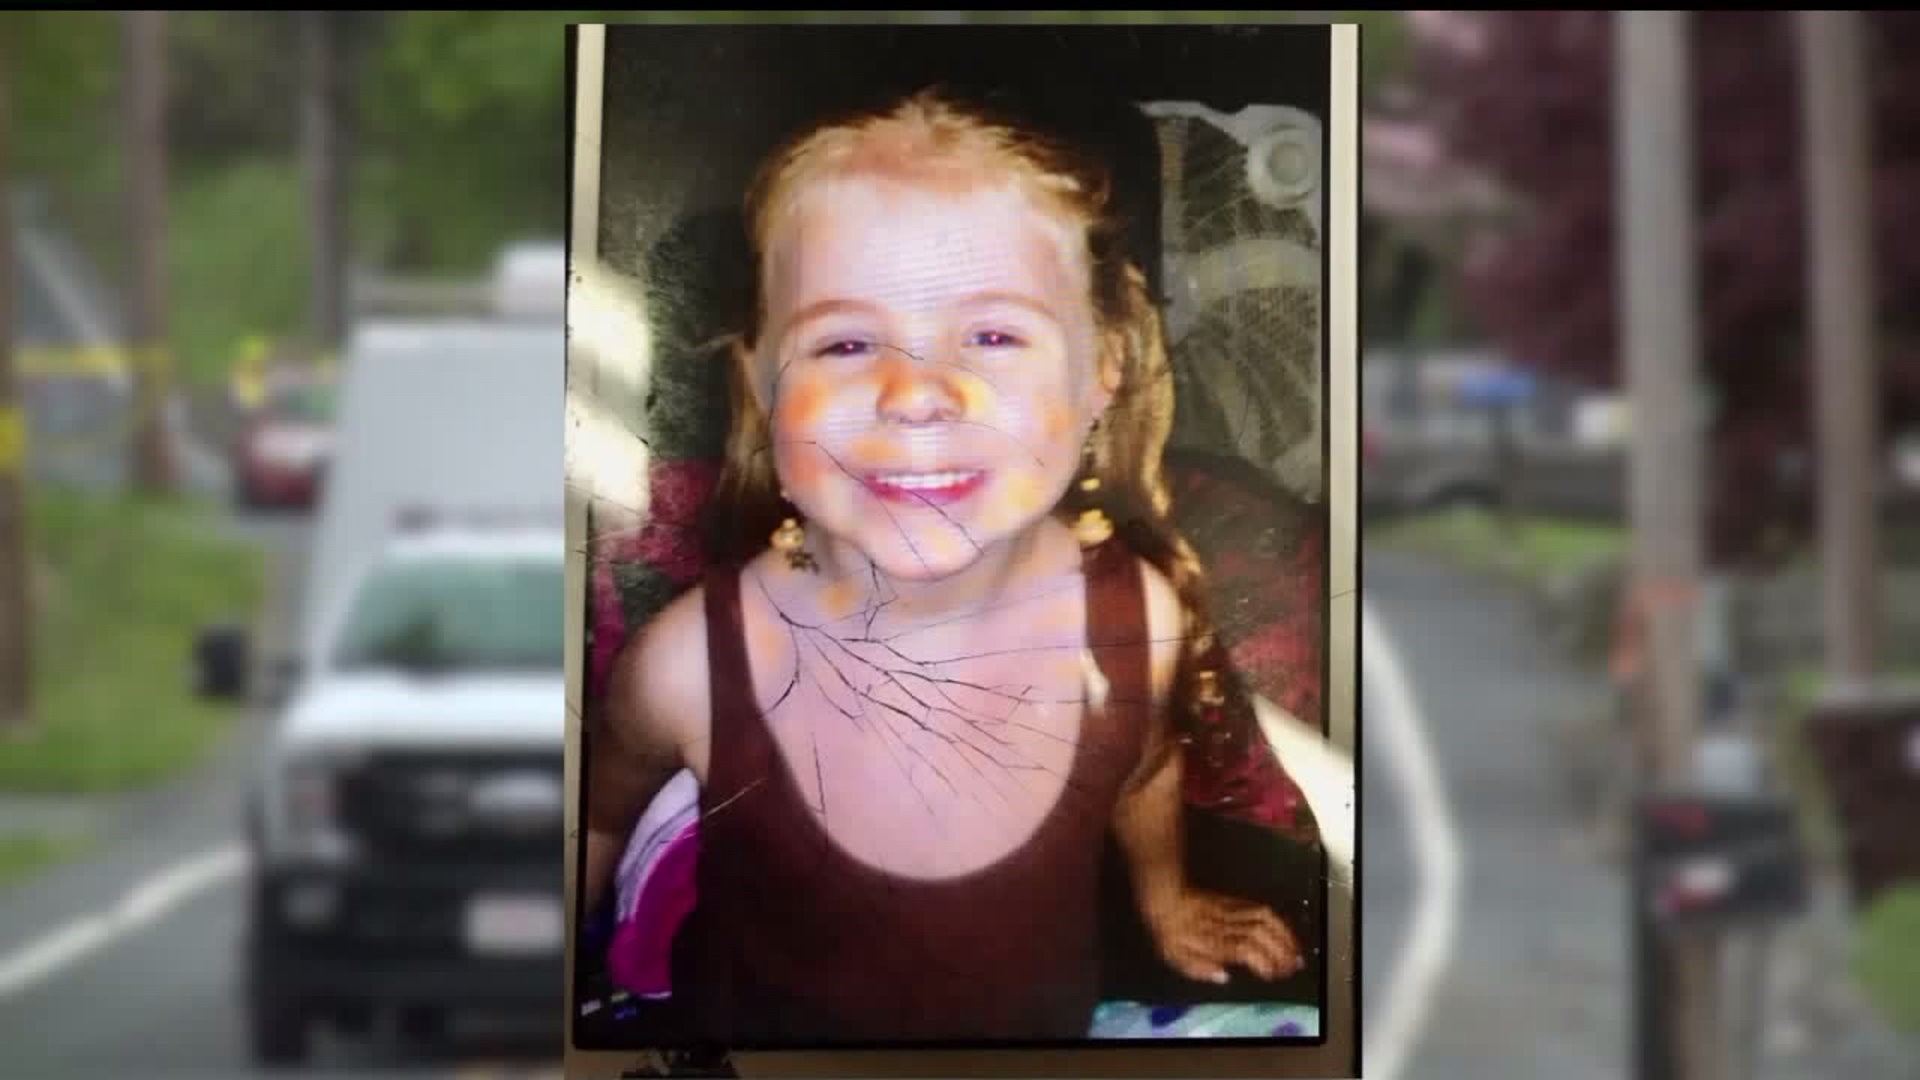 4-Year-Old Girl Found Safe